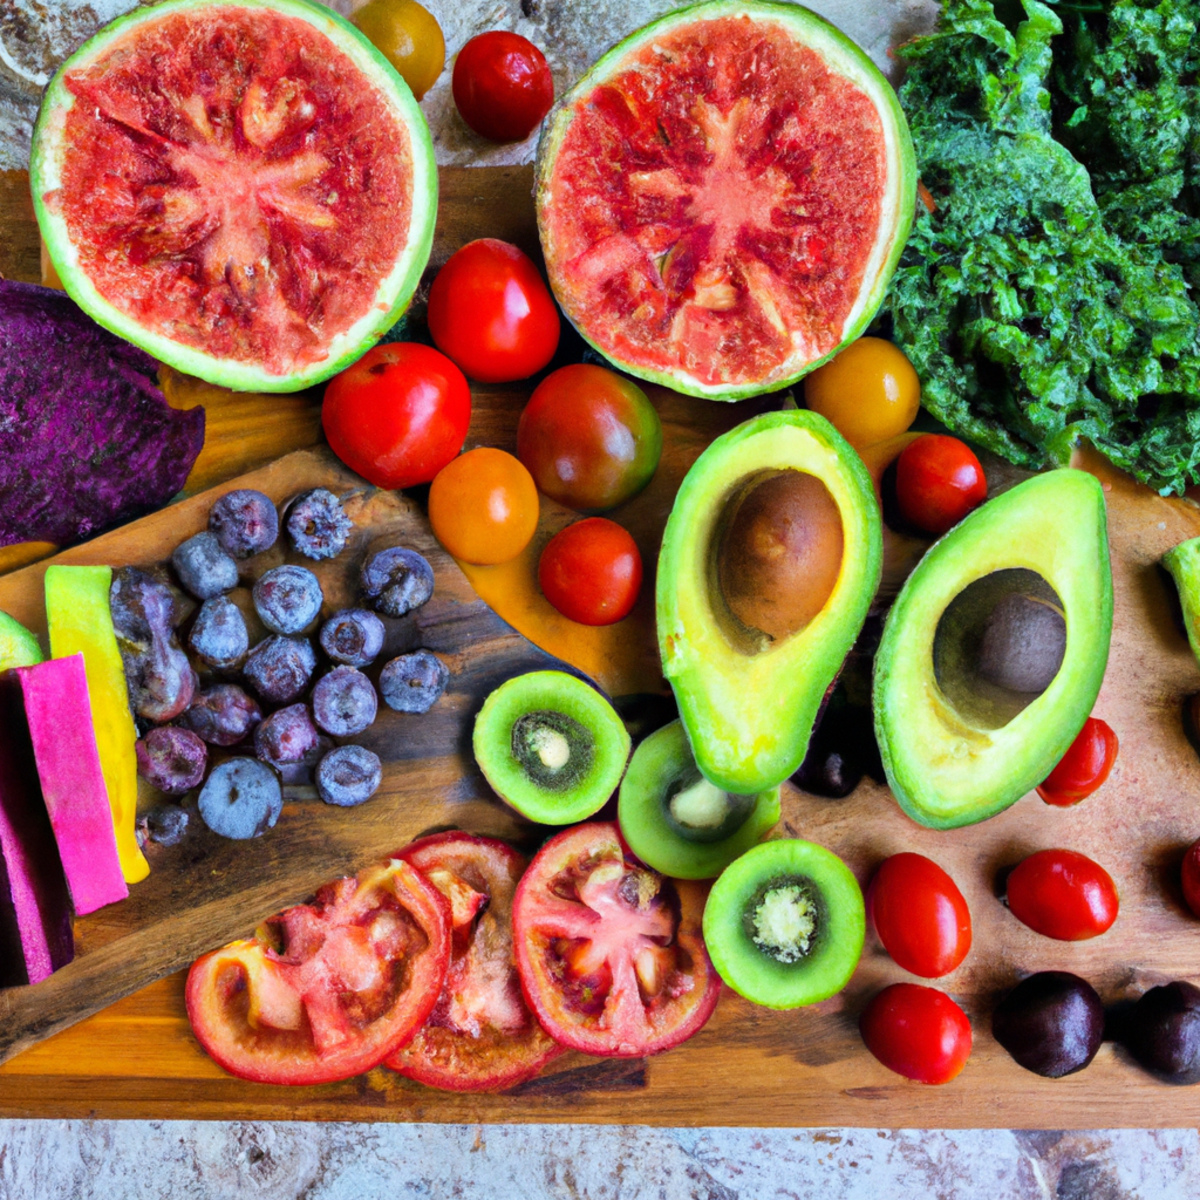 The photo captures a wooden cutting board with an array of colorful fruits and vegetables arranged in a visually appealing manner. A ripe avocado, sliced into halves, sits next to a pile of bright red cherry tomatoes. A bunch of leafy kale is neatly stacked next to a cluster of vibrant purple grapes. A few slices of juicy watermelon and a handful of blueberries complete the picture. The natural lighting highlights the textures and colors of the produce, making them look fresh and inviting. The photo perfectly captures the essence of functional eating, showcasing the importance of incorporating nutrient-dense foods into one's diet.